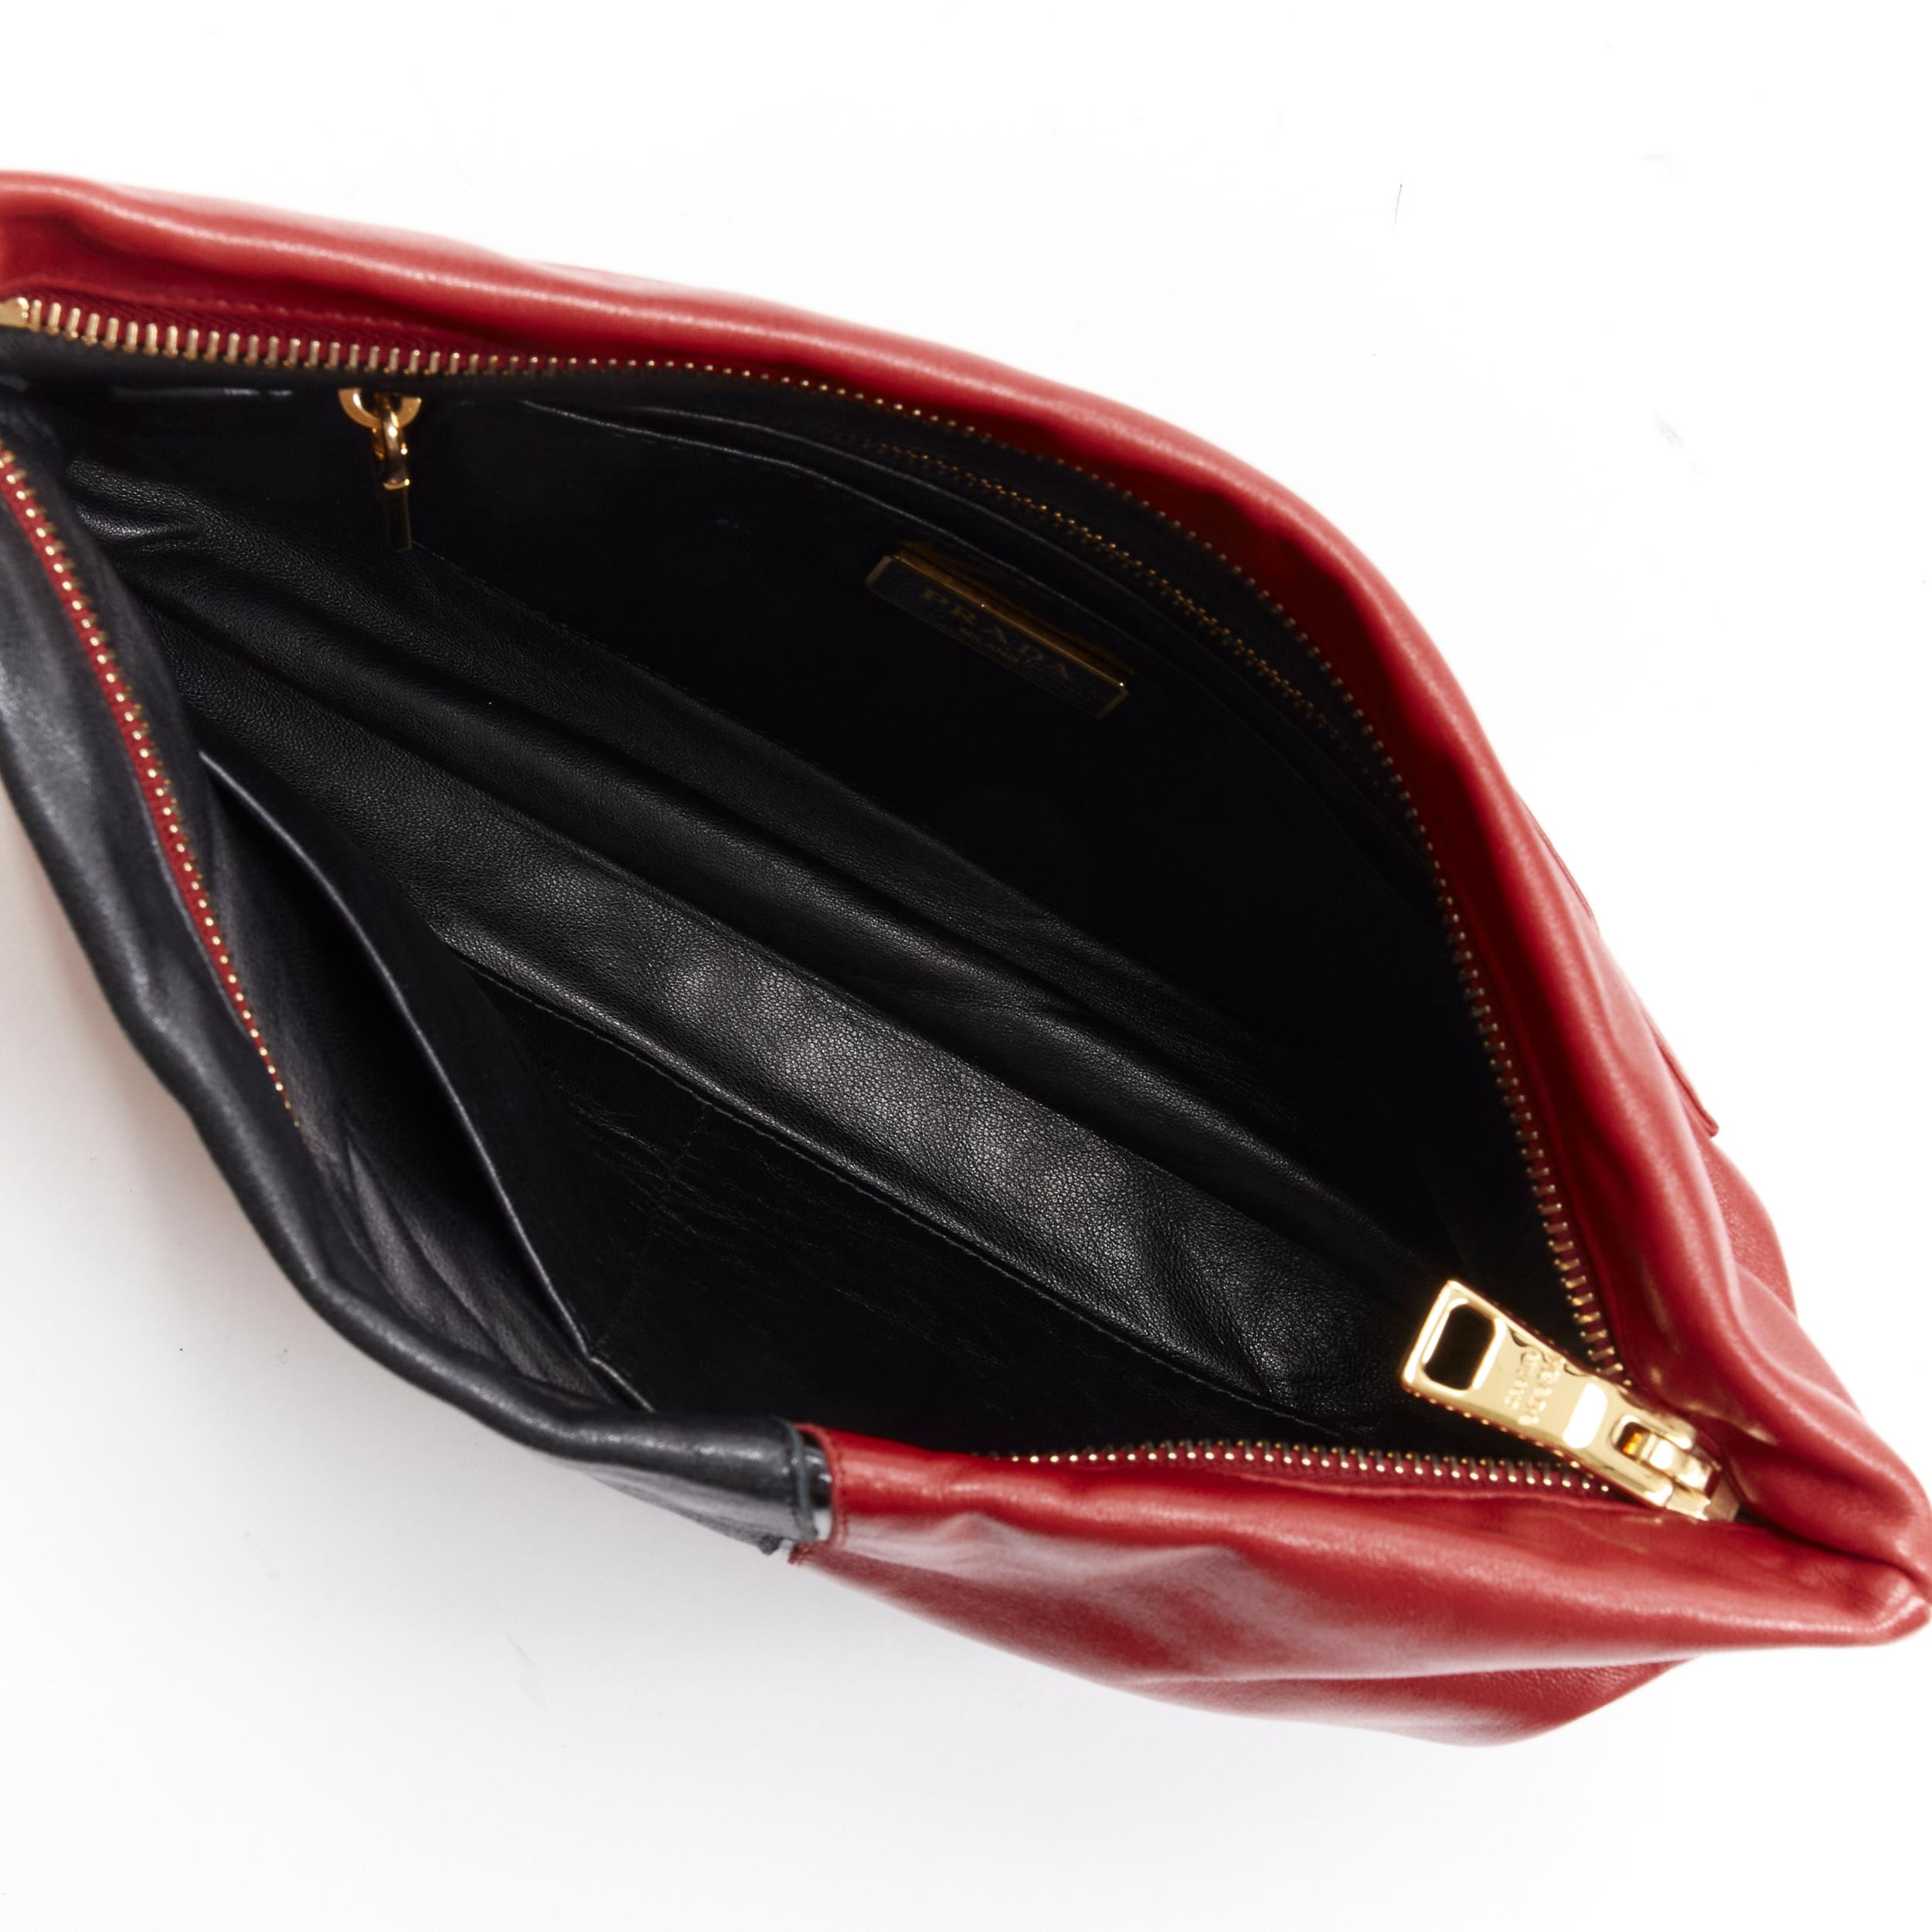 PRADA 2014 Limited Edition pop girl face black red leather oversized clutch bag 6